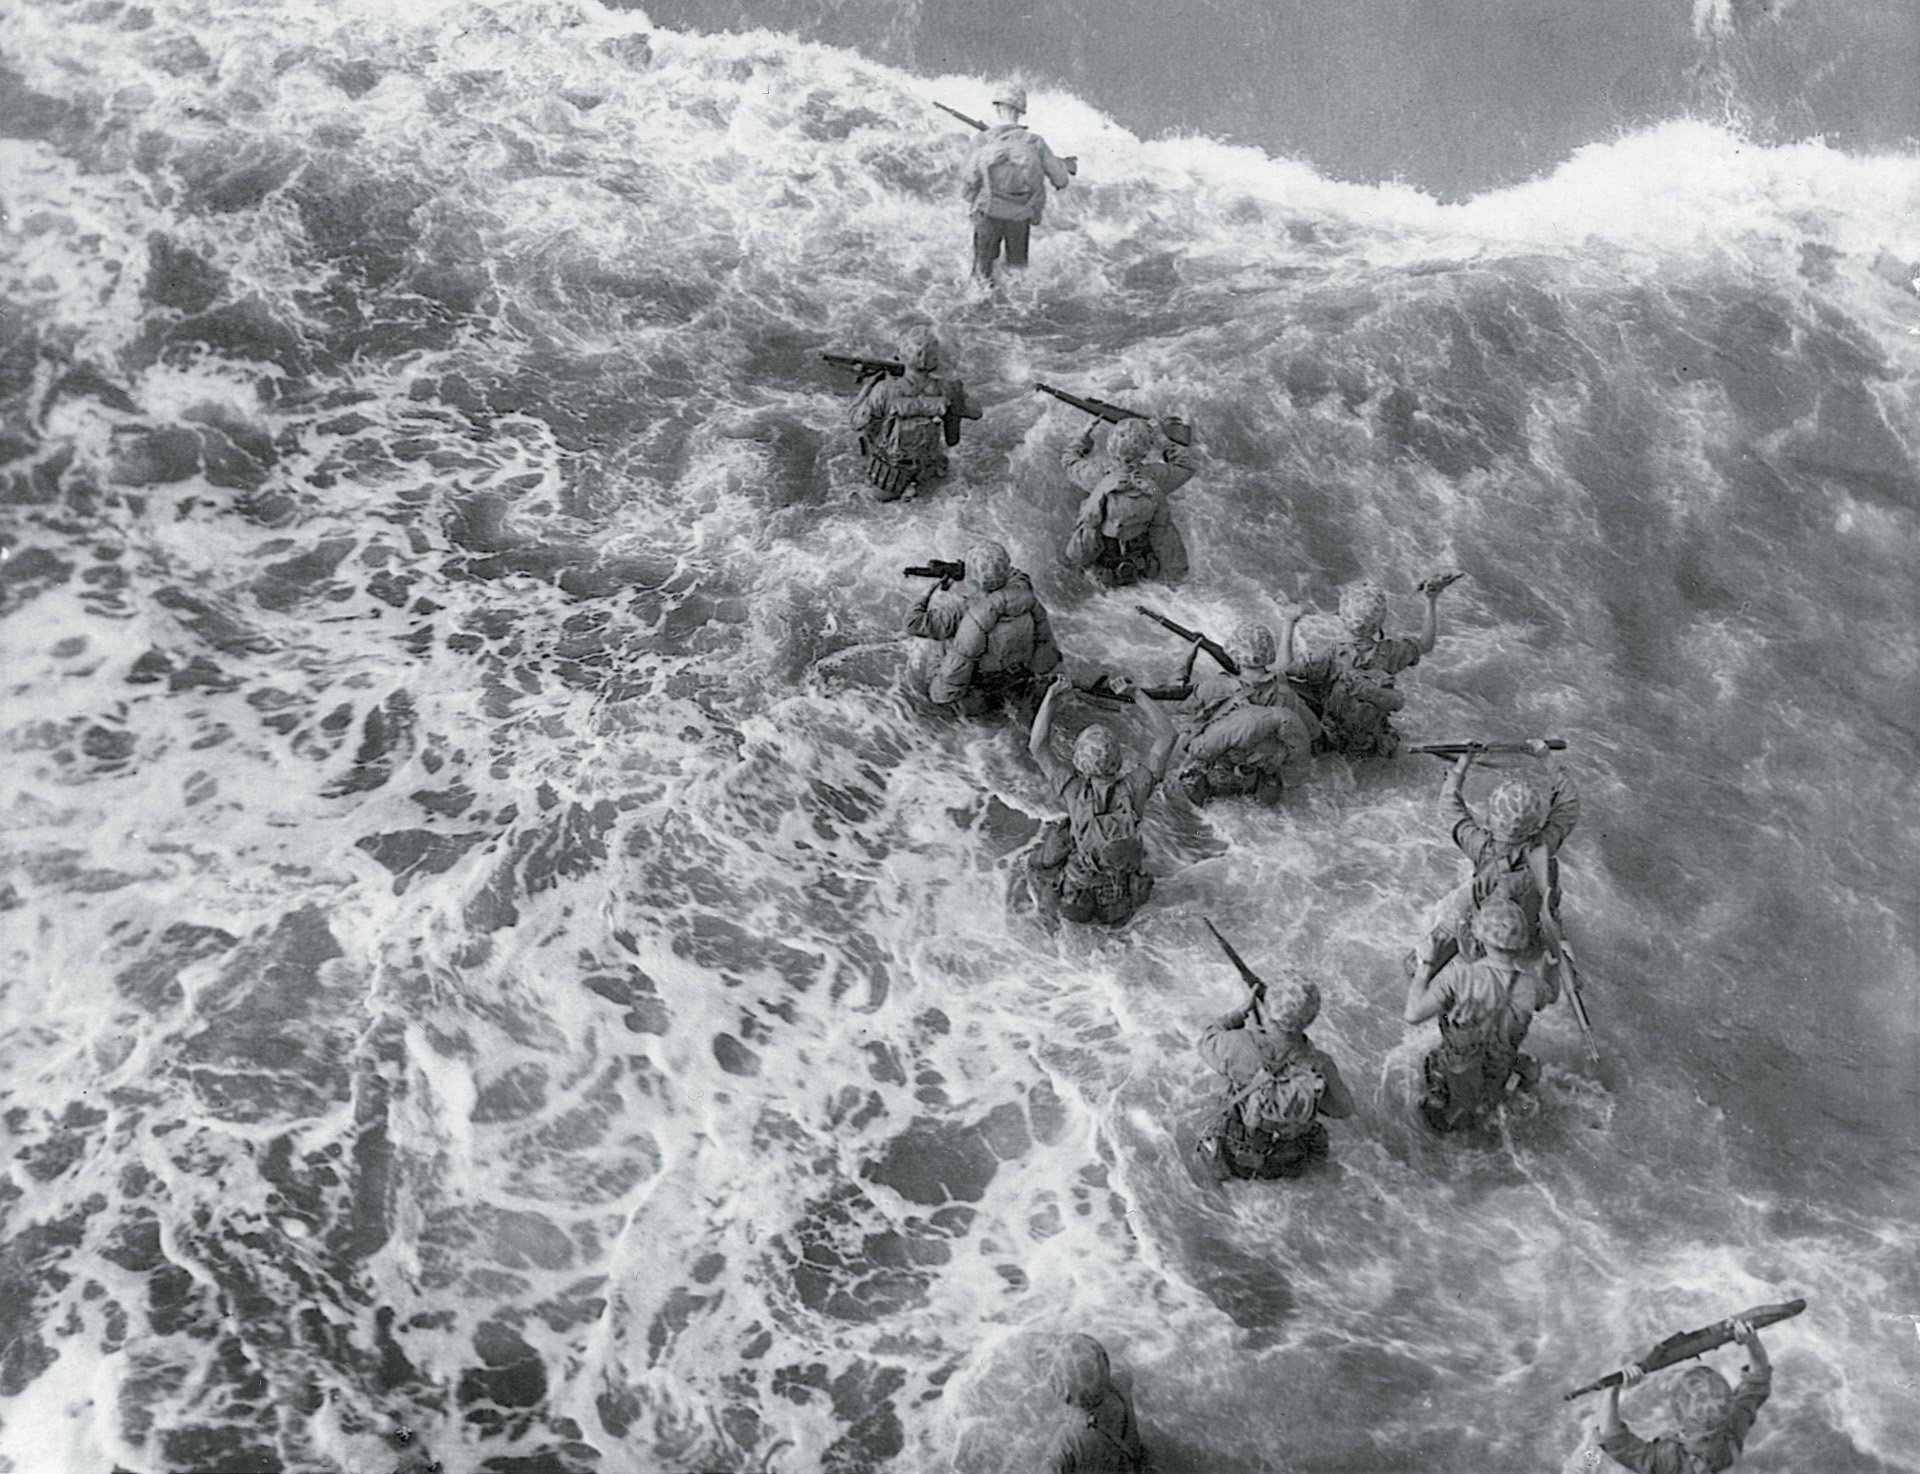 Their rifles held high out of the surf, Marines wade ashore at Cape Gloucester on December 26, 1943.